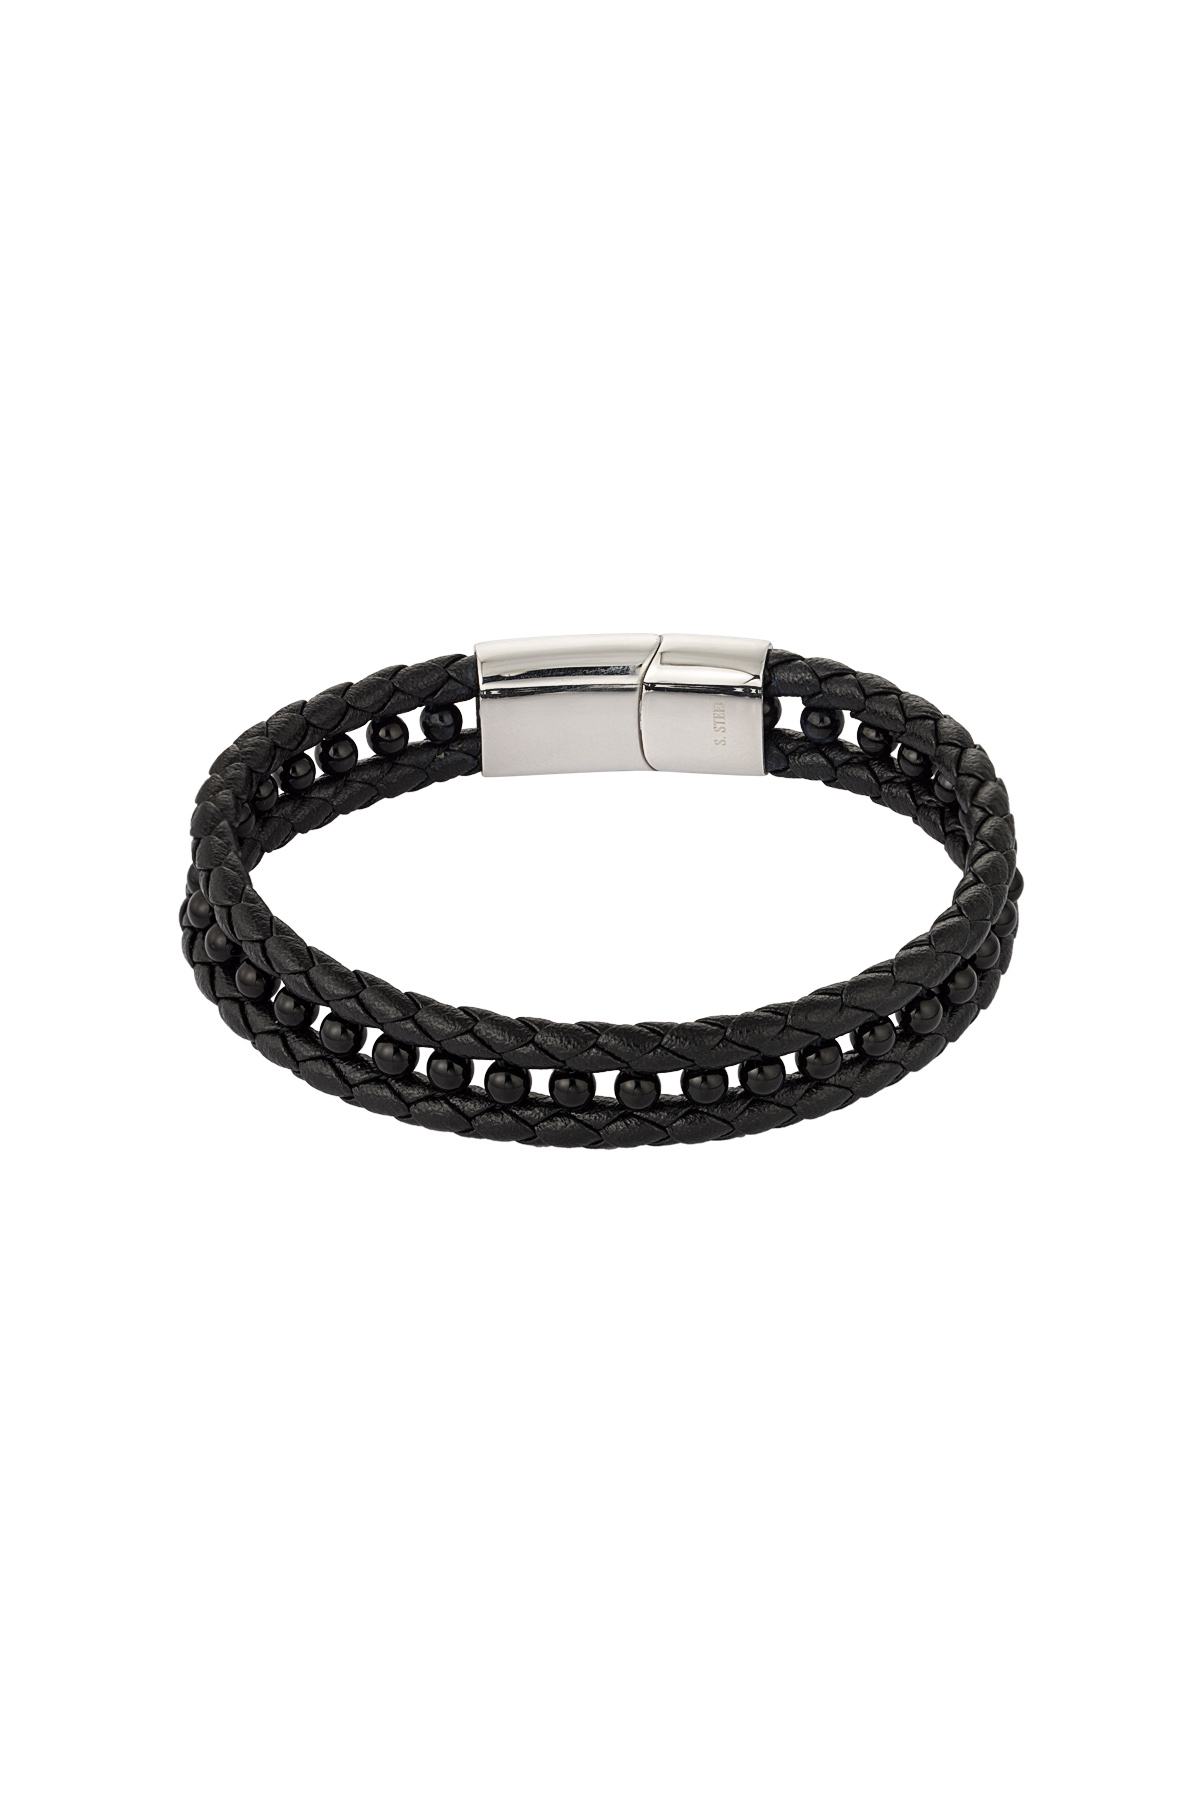 Double men's bracelet braided with beads in the middle - black